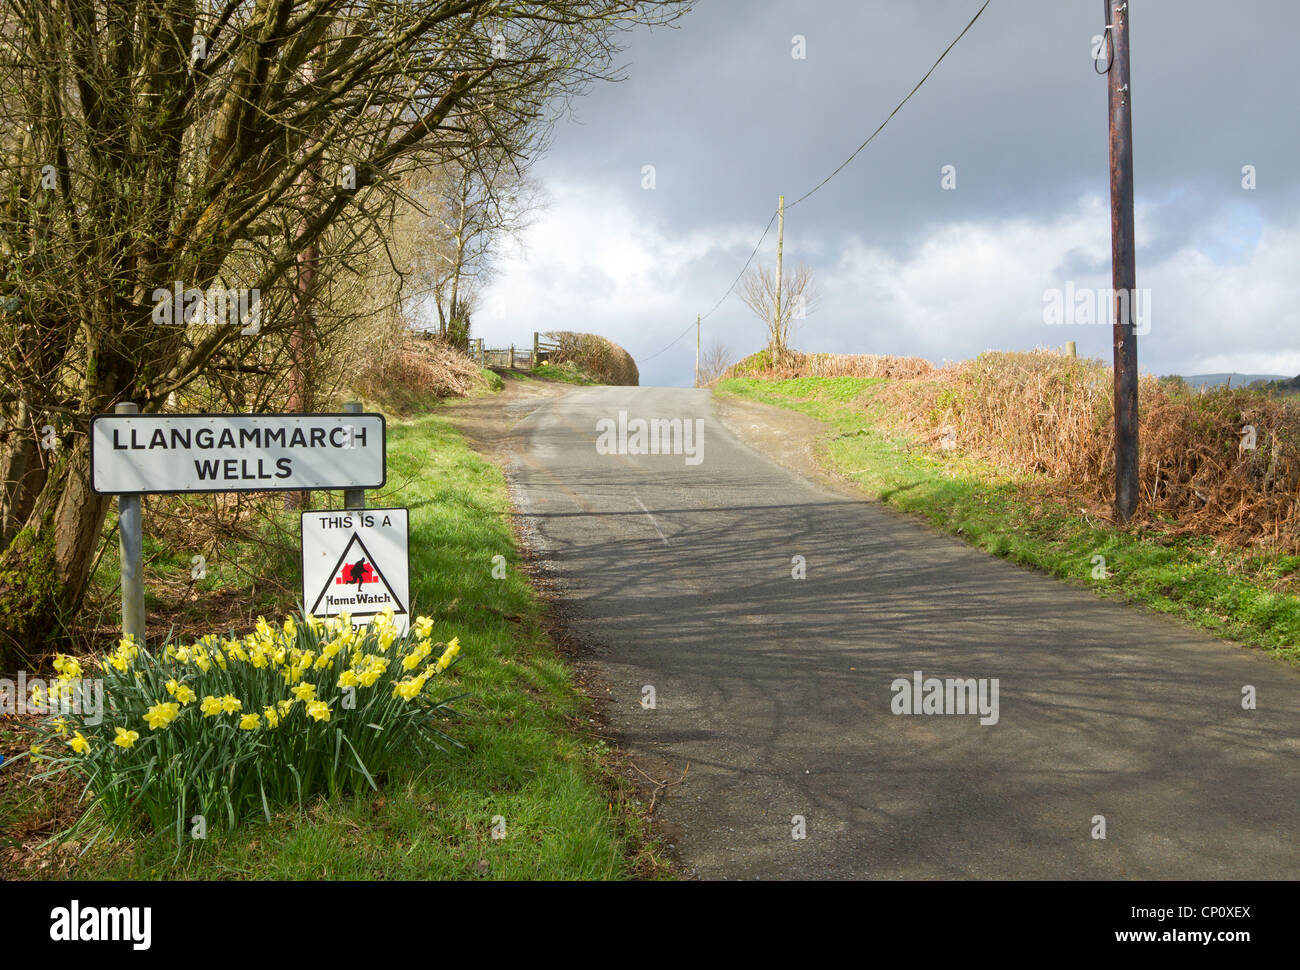 Sing for Llangammarch Wells, narrow countryside road in Wales UK. Stock Photo